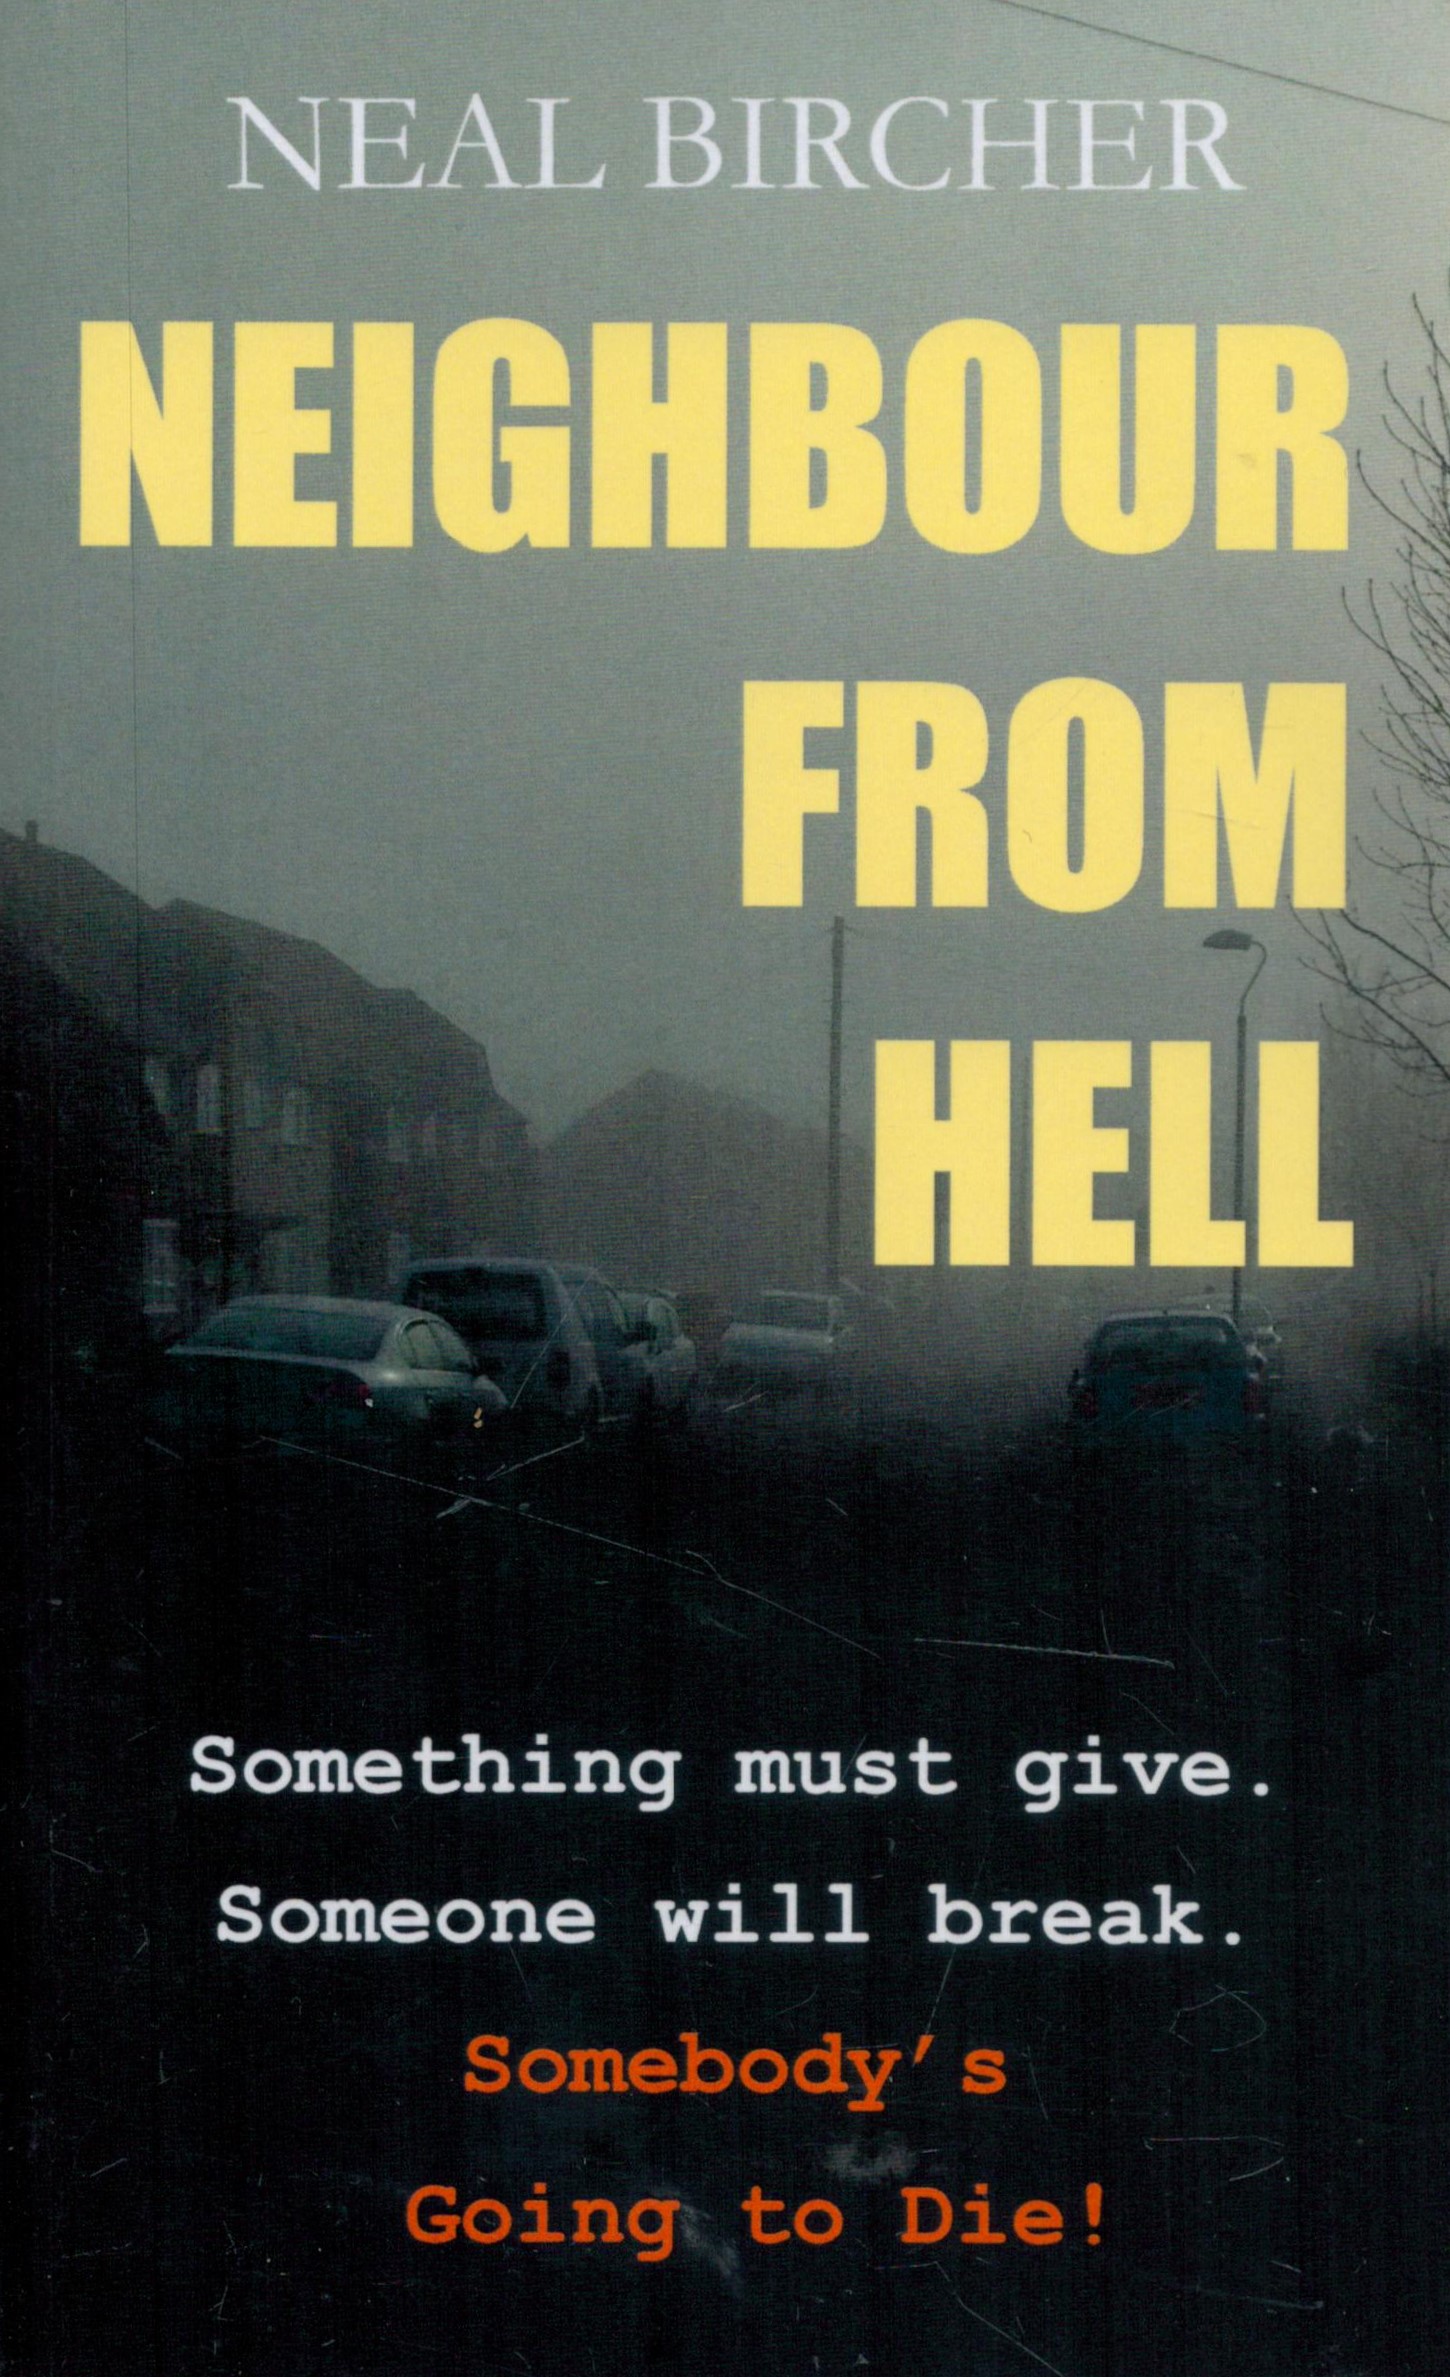 Neal Bircher Signed Book Neighbour from Hell by Neal Bircher 2021 First Edition Softback Book with